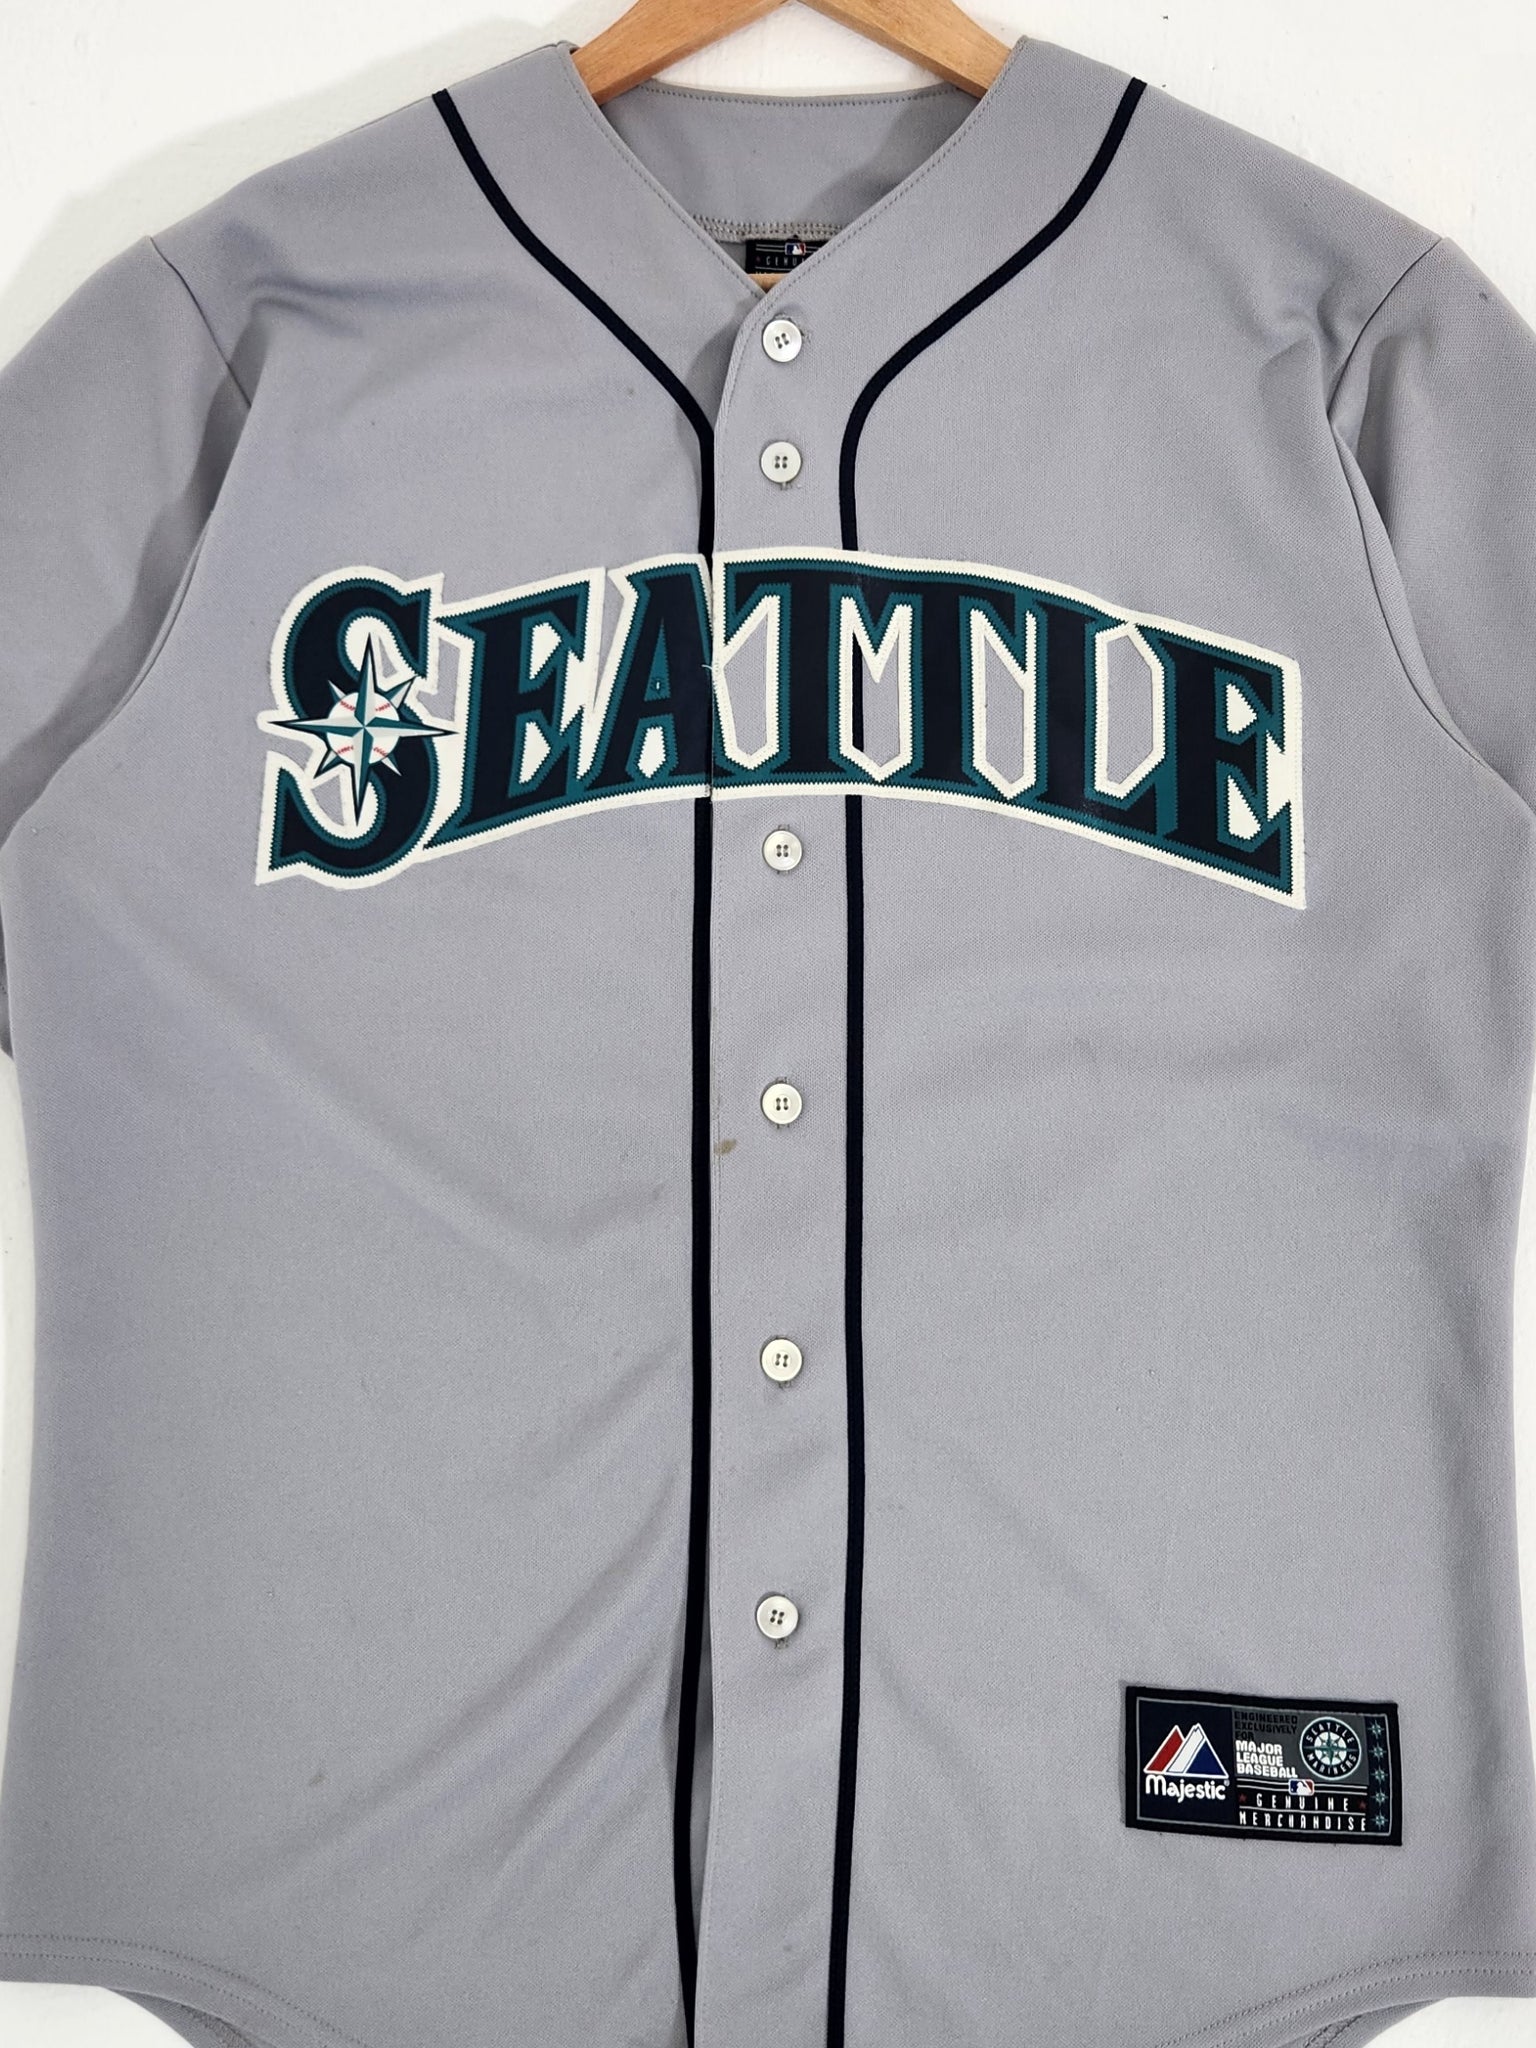 Gray Seattle Mariners Dustin Ackley #13 Jersey Sz. M